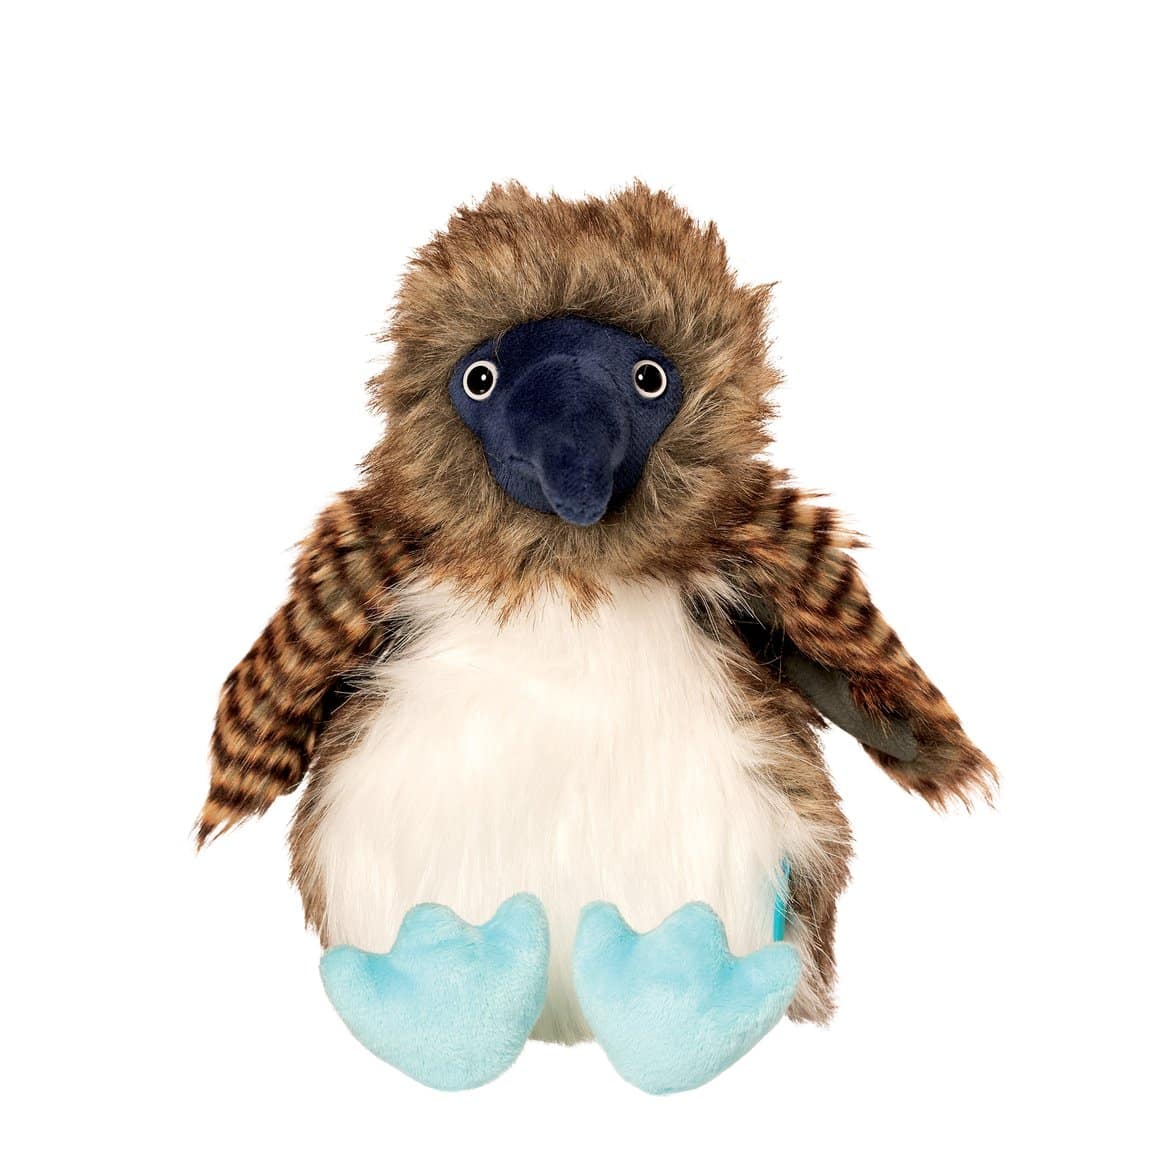 Benny the Blue Footed Boobie